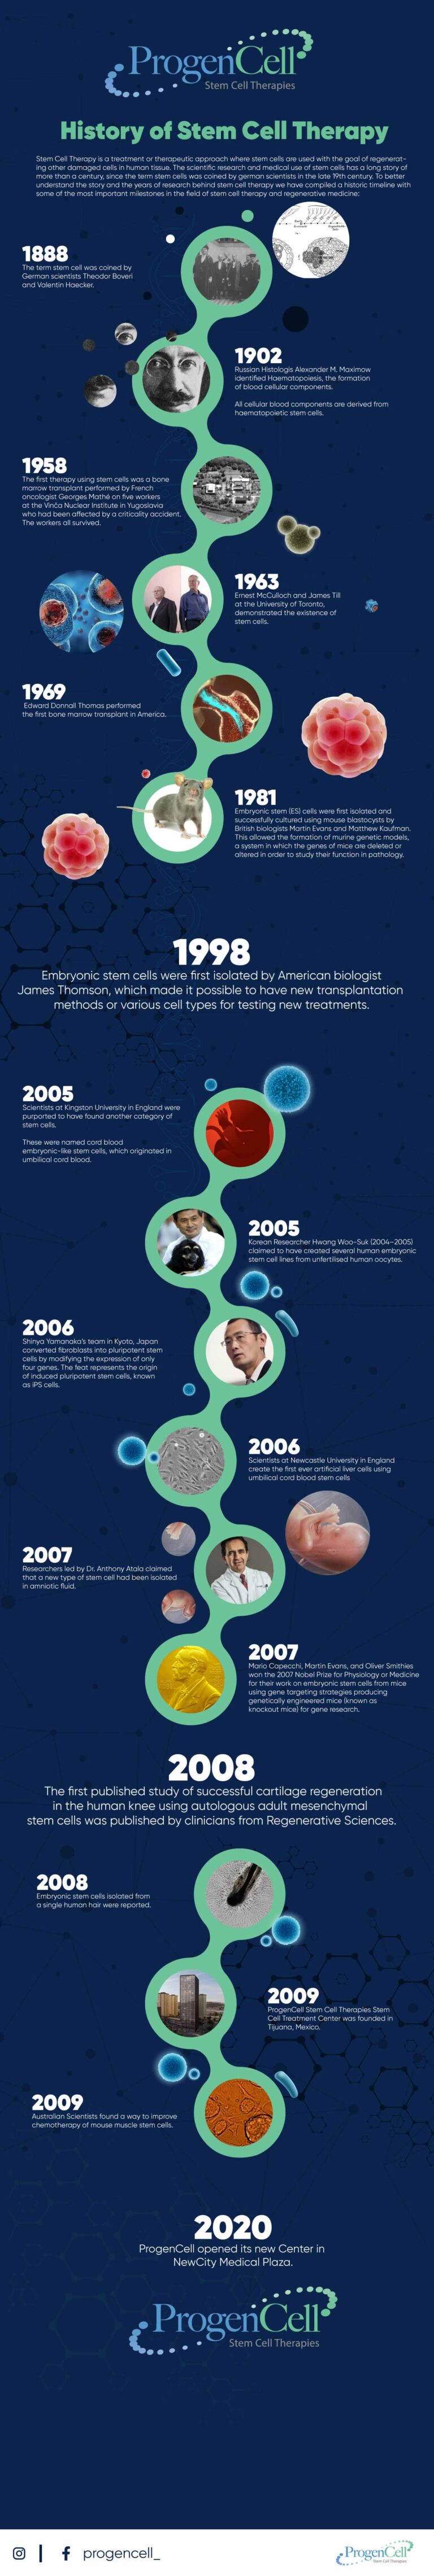 history of research stem cell